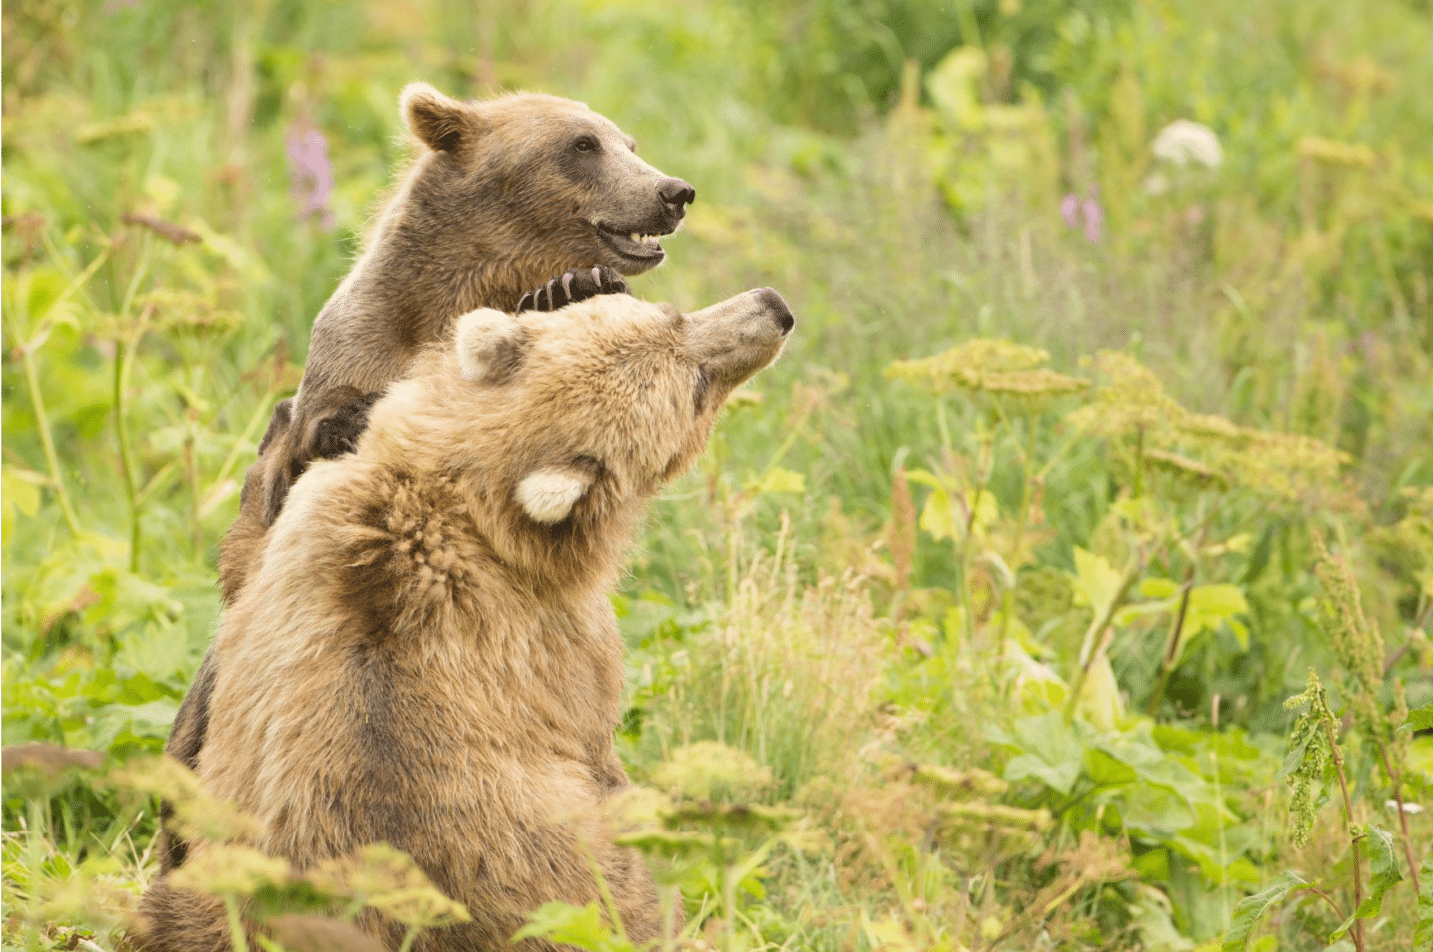 A grizzly bear wrestles with its young cub.